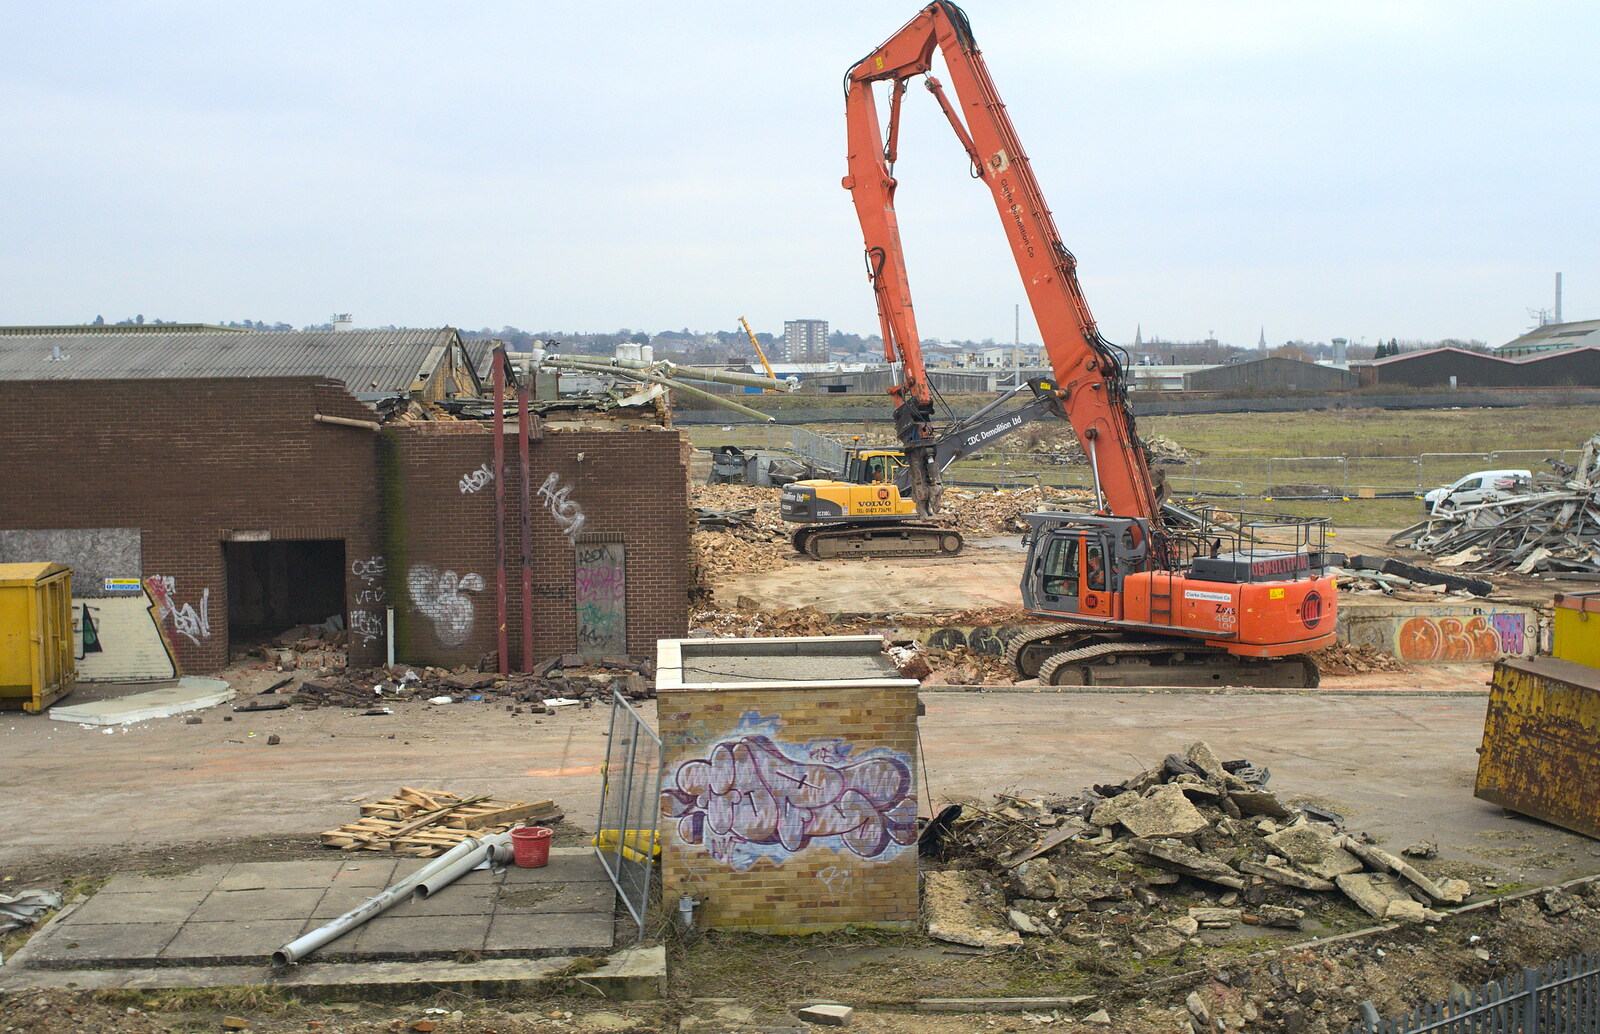 A pneumatic hammer gets to work from The Demolition of the Bacon Factory, Ipswich, Suffolk - 20th February 2013